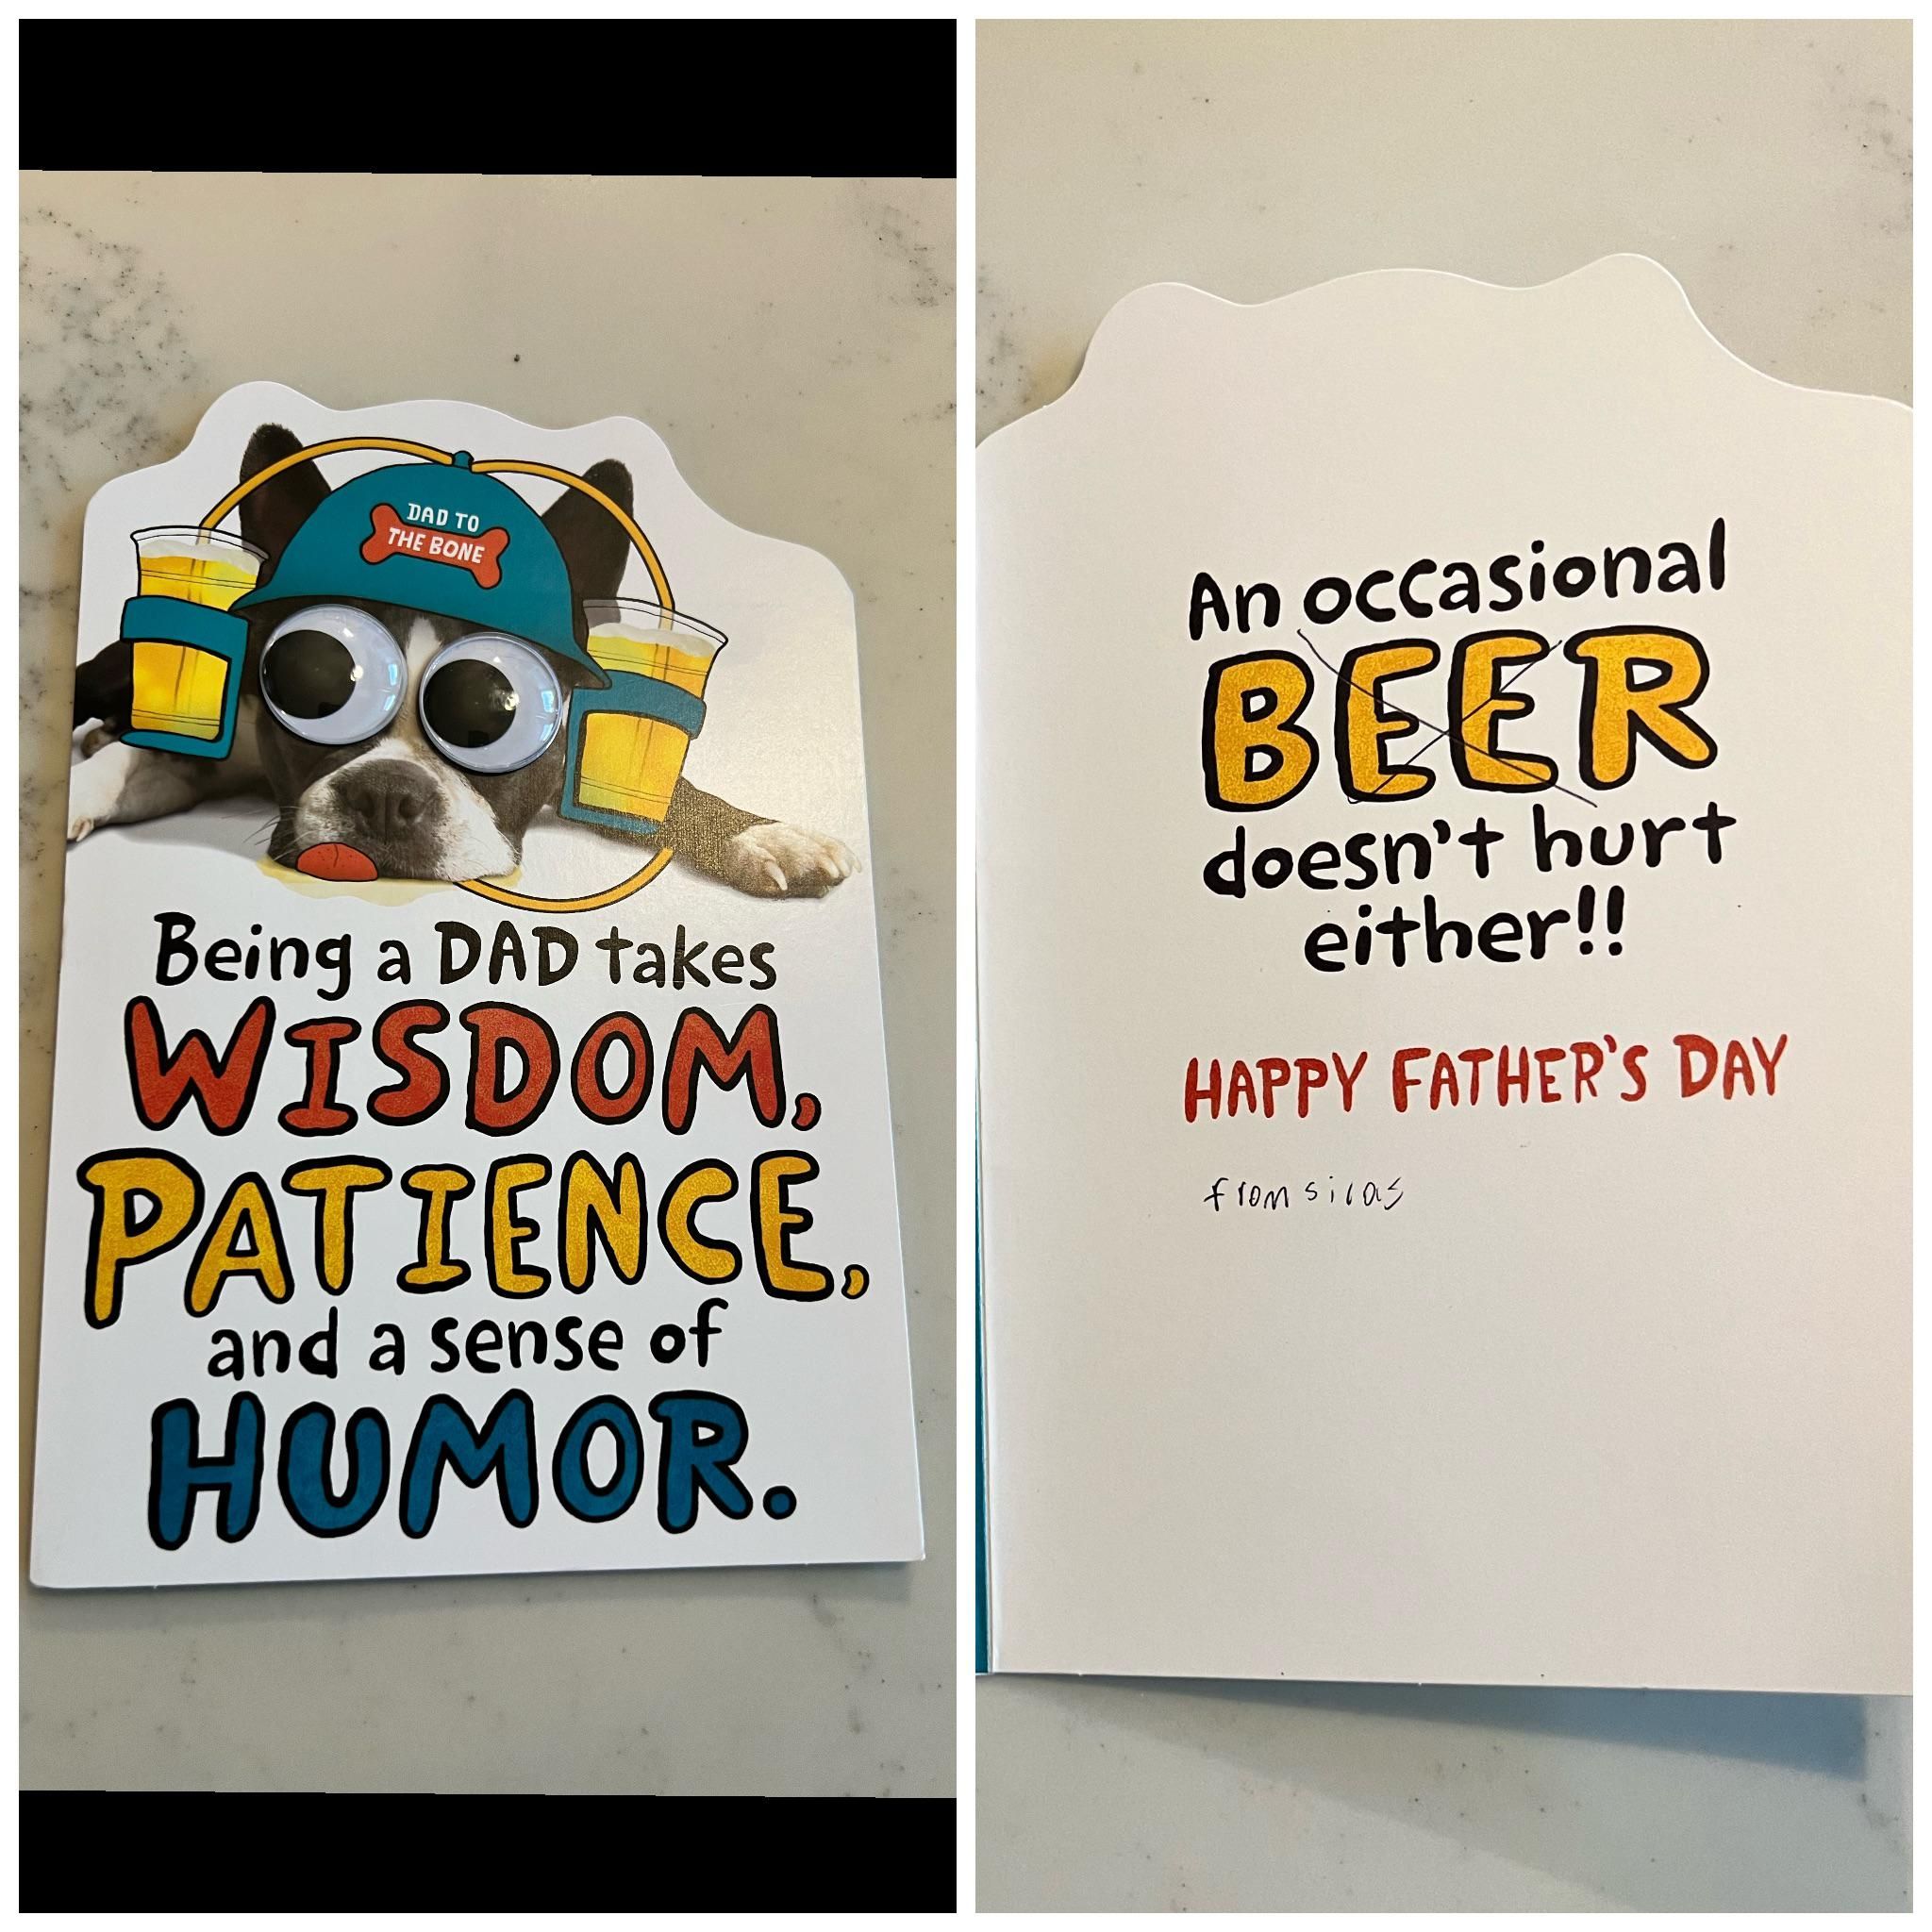 My son gave me this card today but warned me he didn’t actually read it before he got it. I’m a recovering alcoholic.